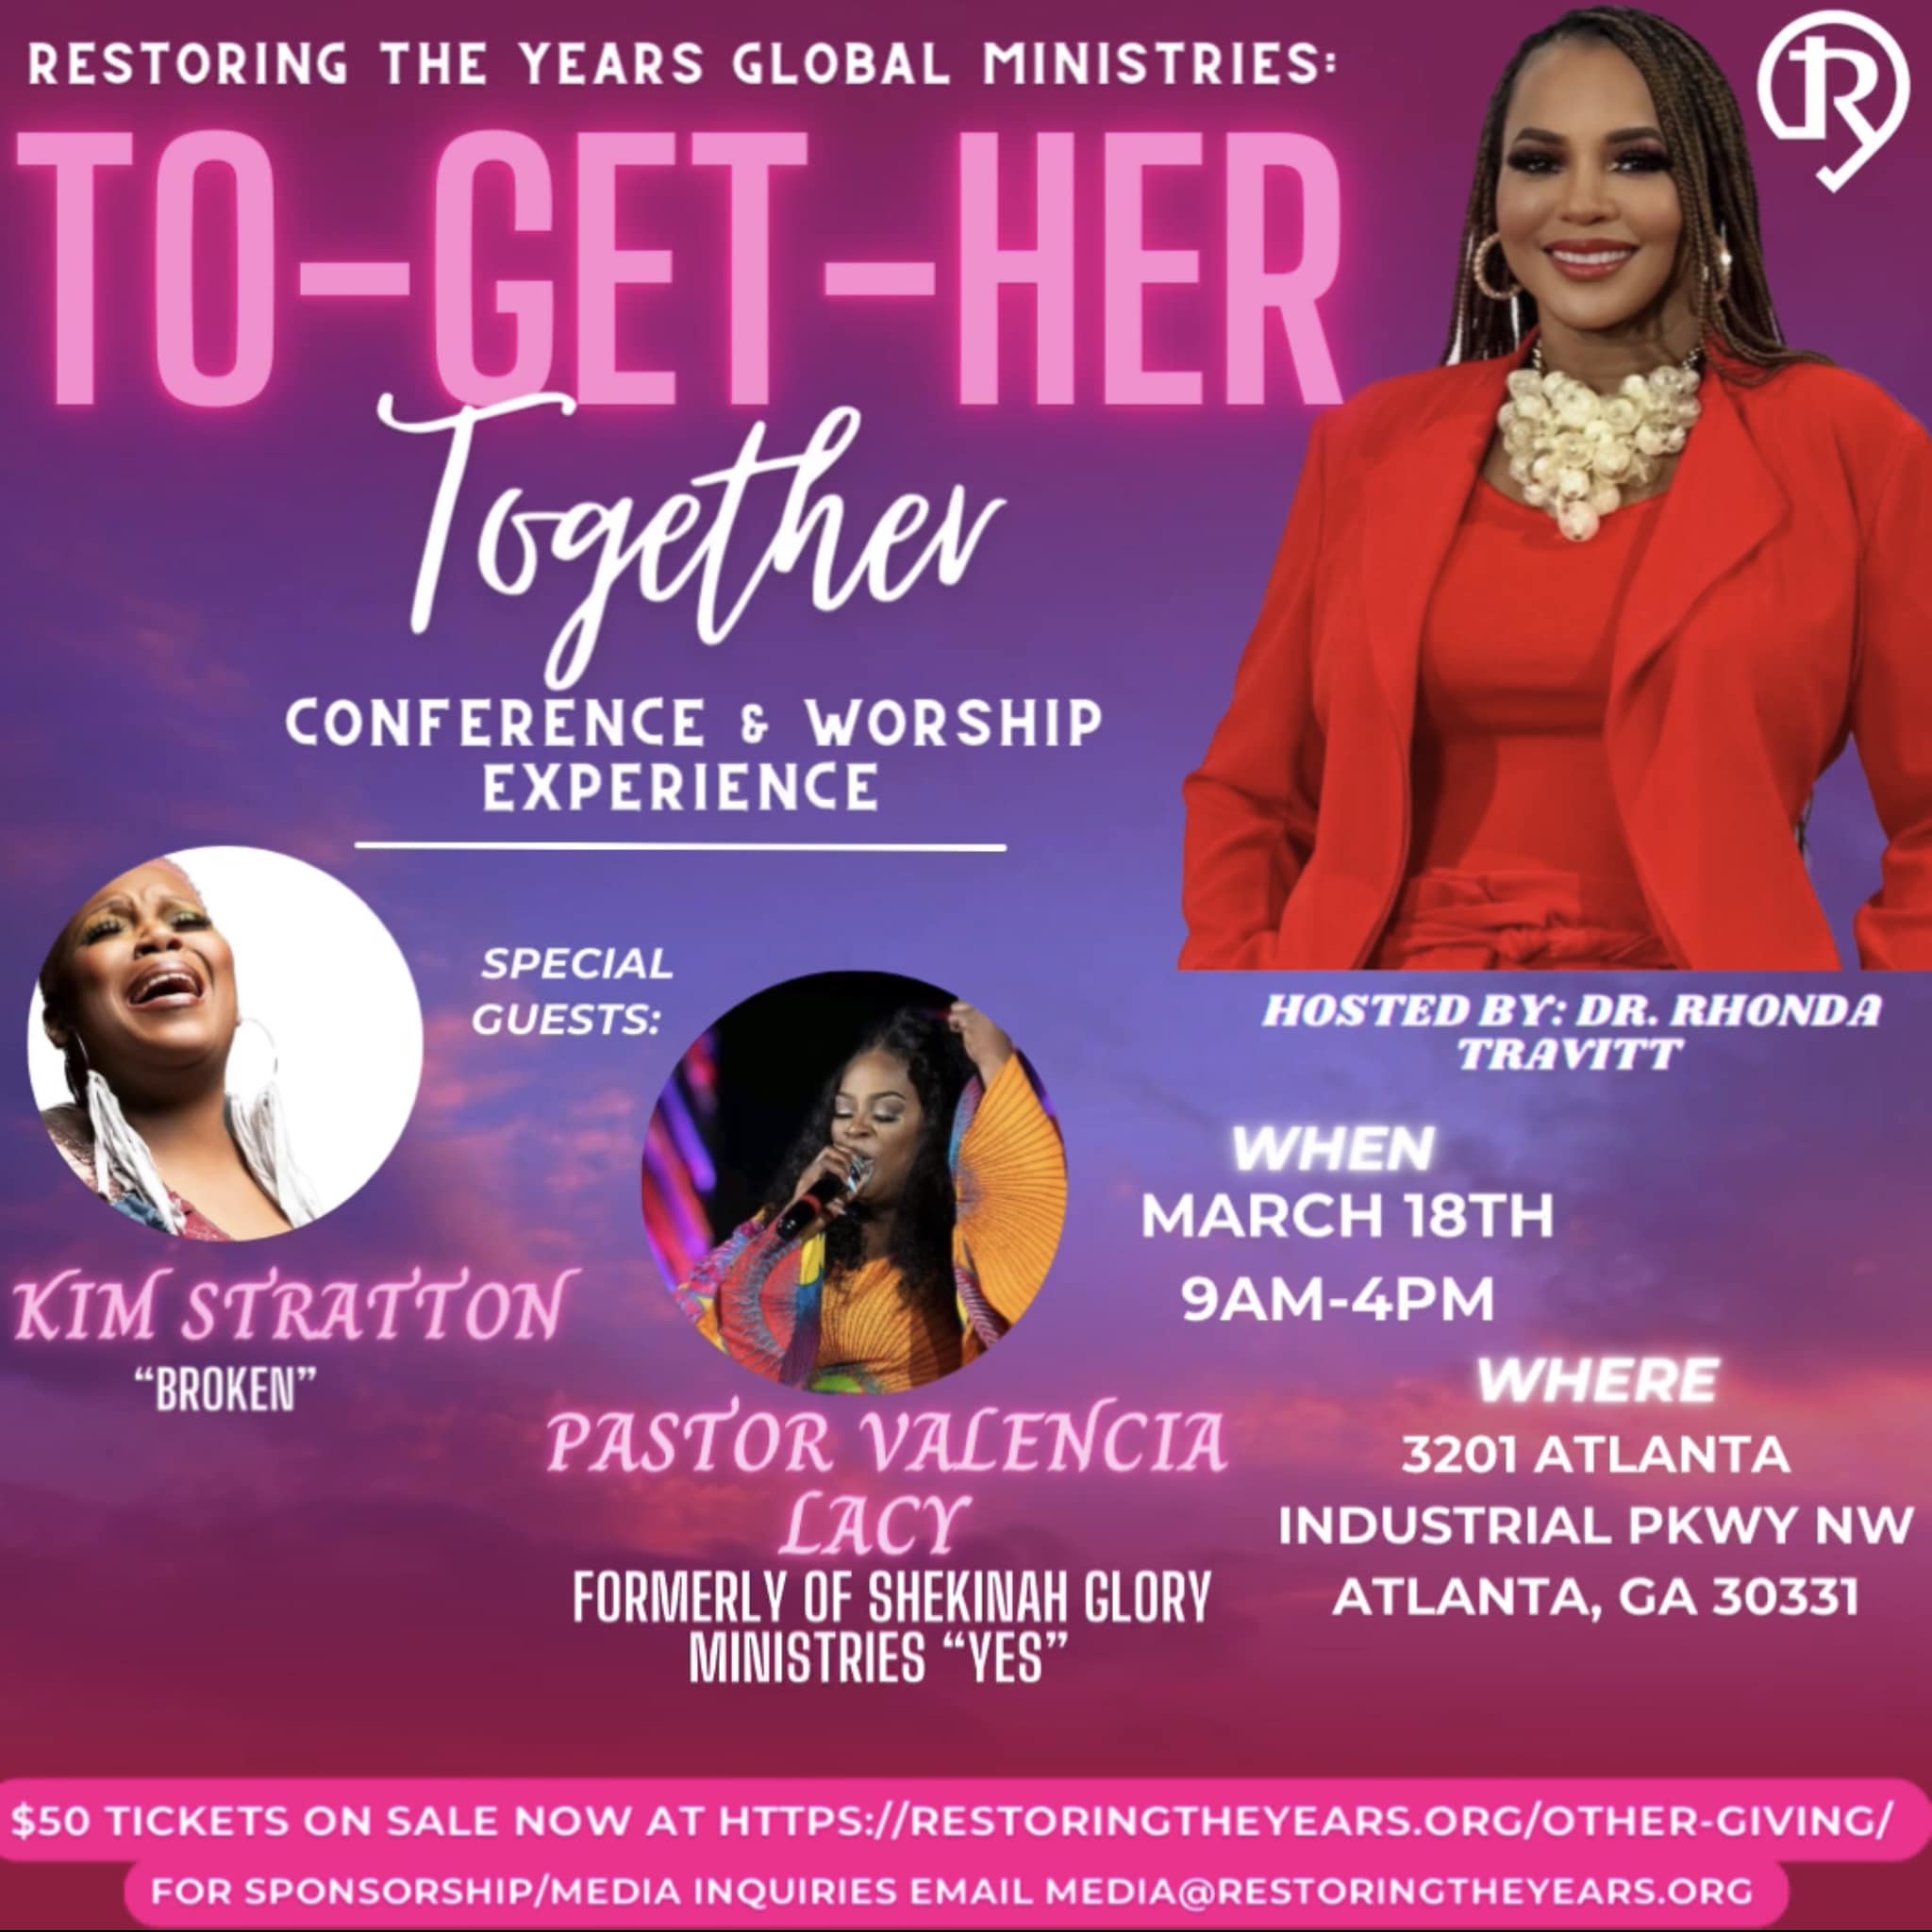 RTYGM To-Get-Her Together Conference & Worship Experience